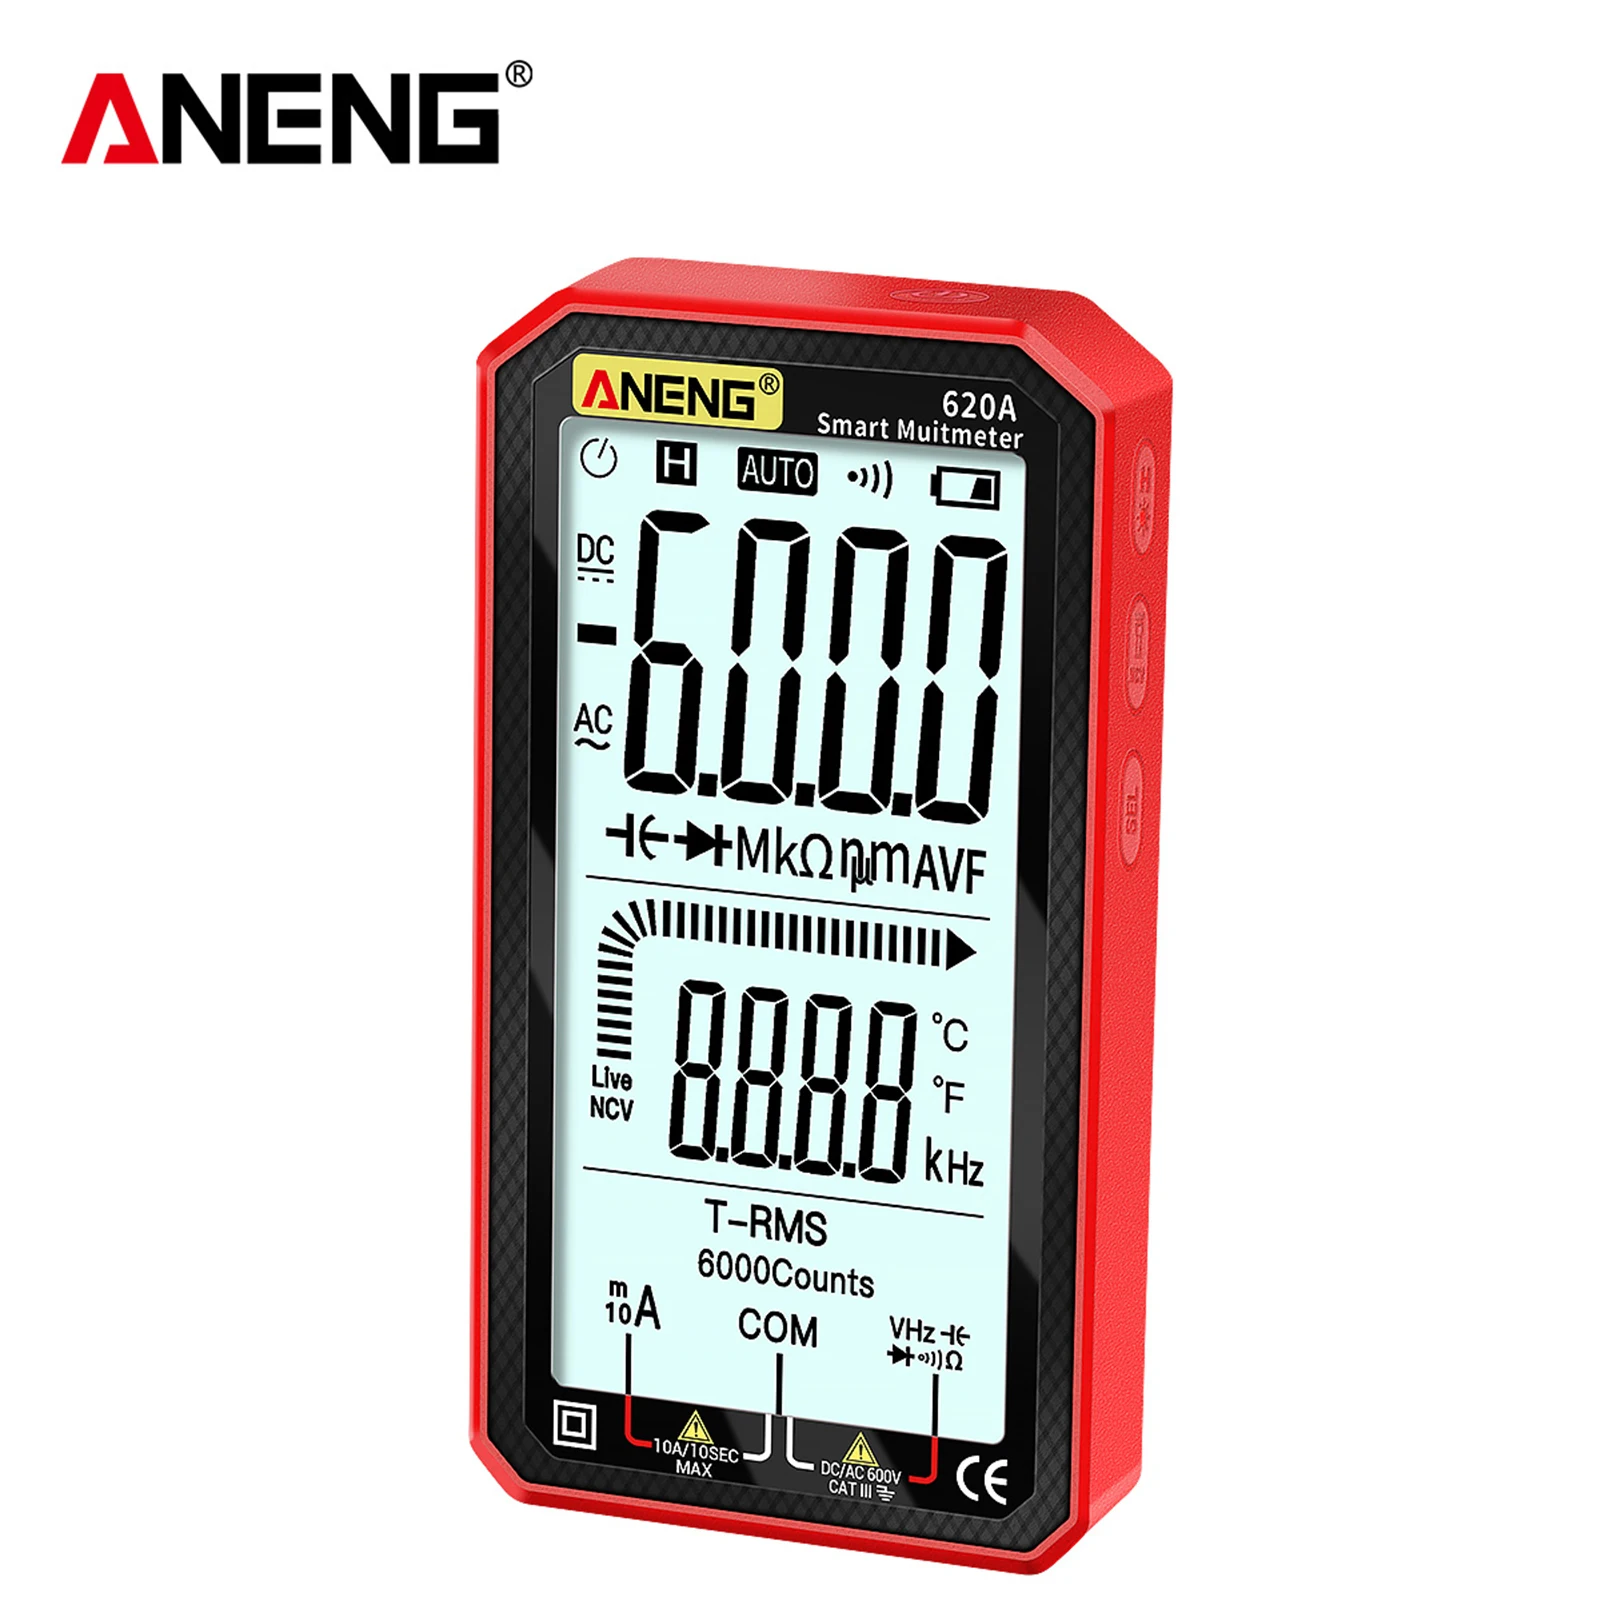 

ANENG True-RMS Auto-Ranging Digital Multimeter with Amp Volt Ohm Capacitance Continuity Temperature Frequency Diode Tests